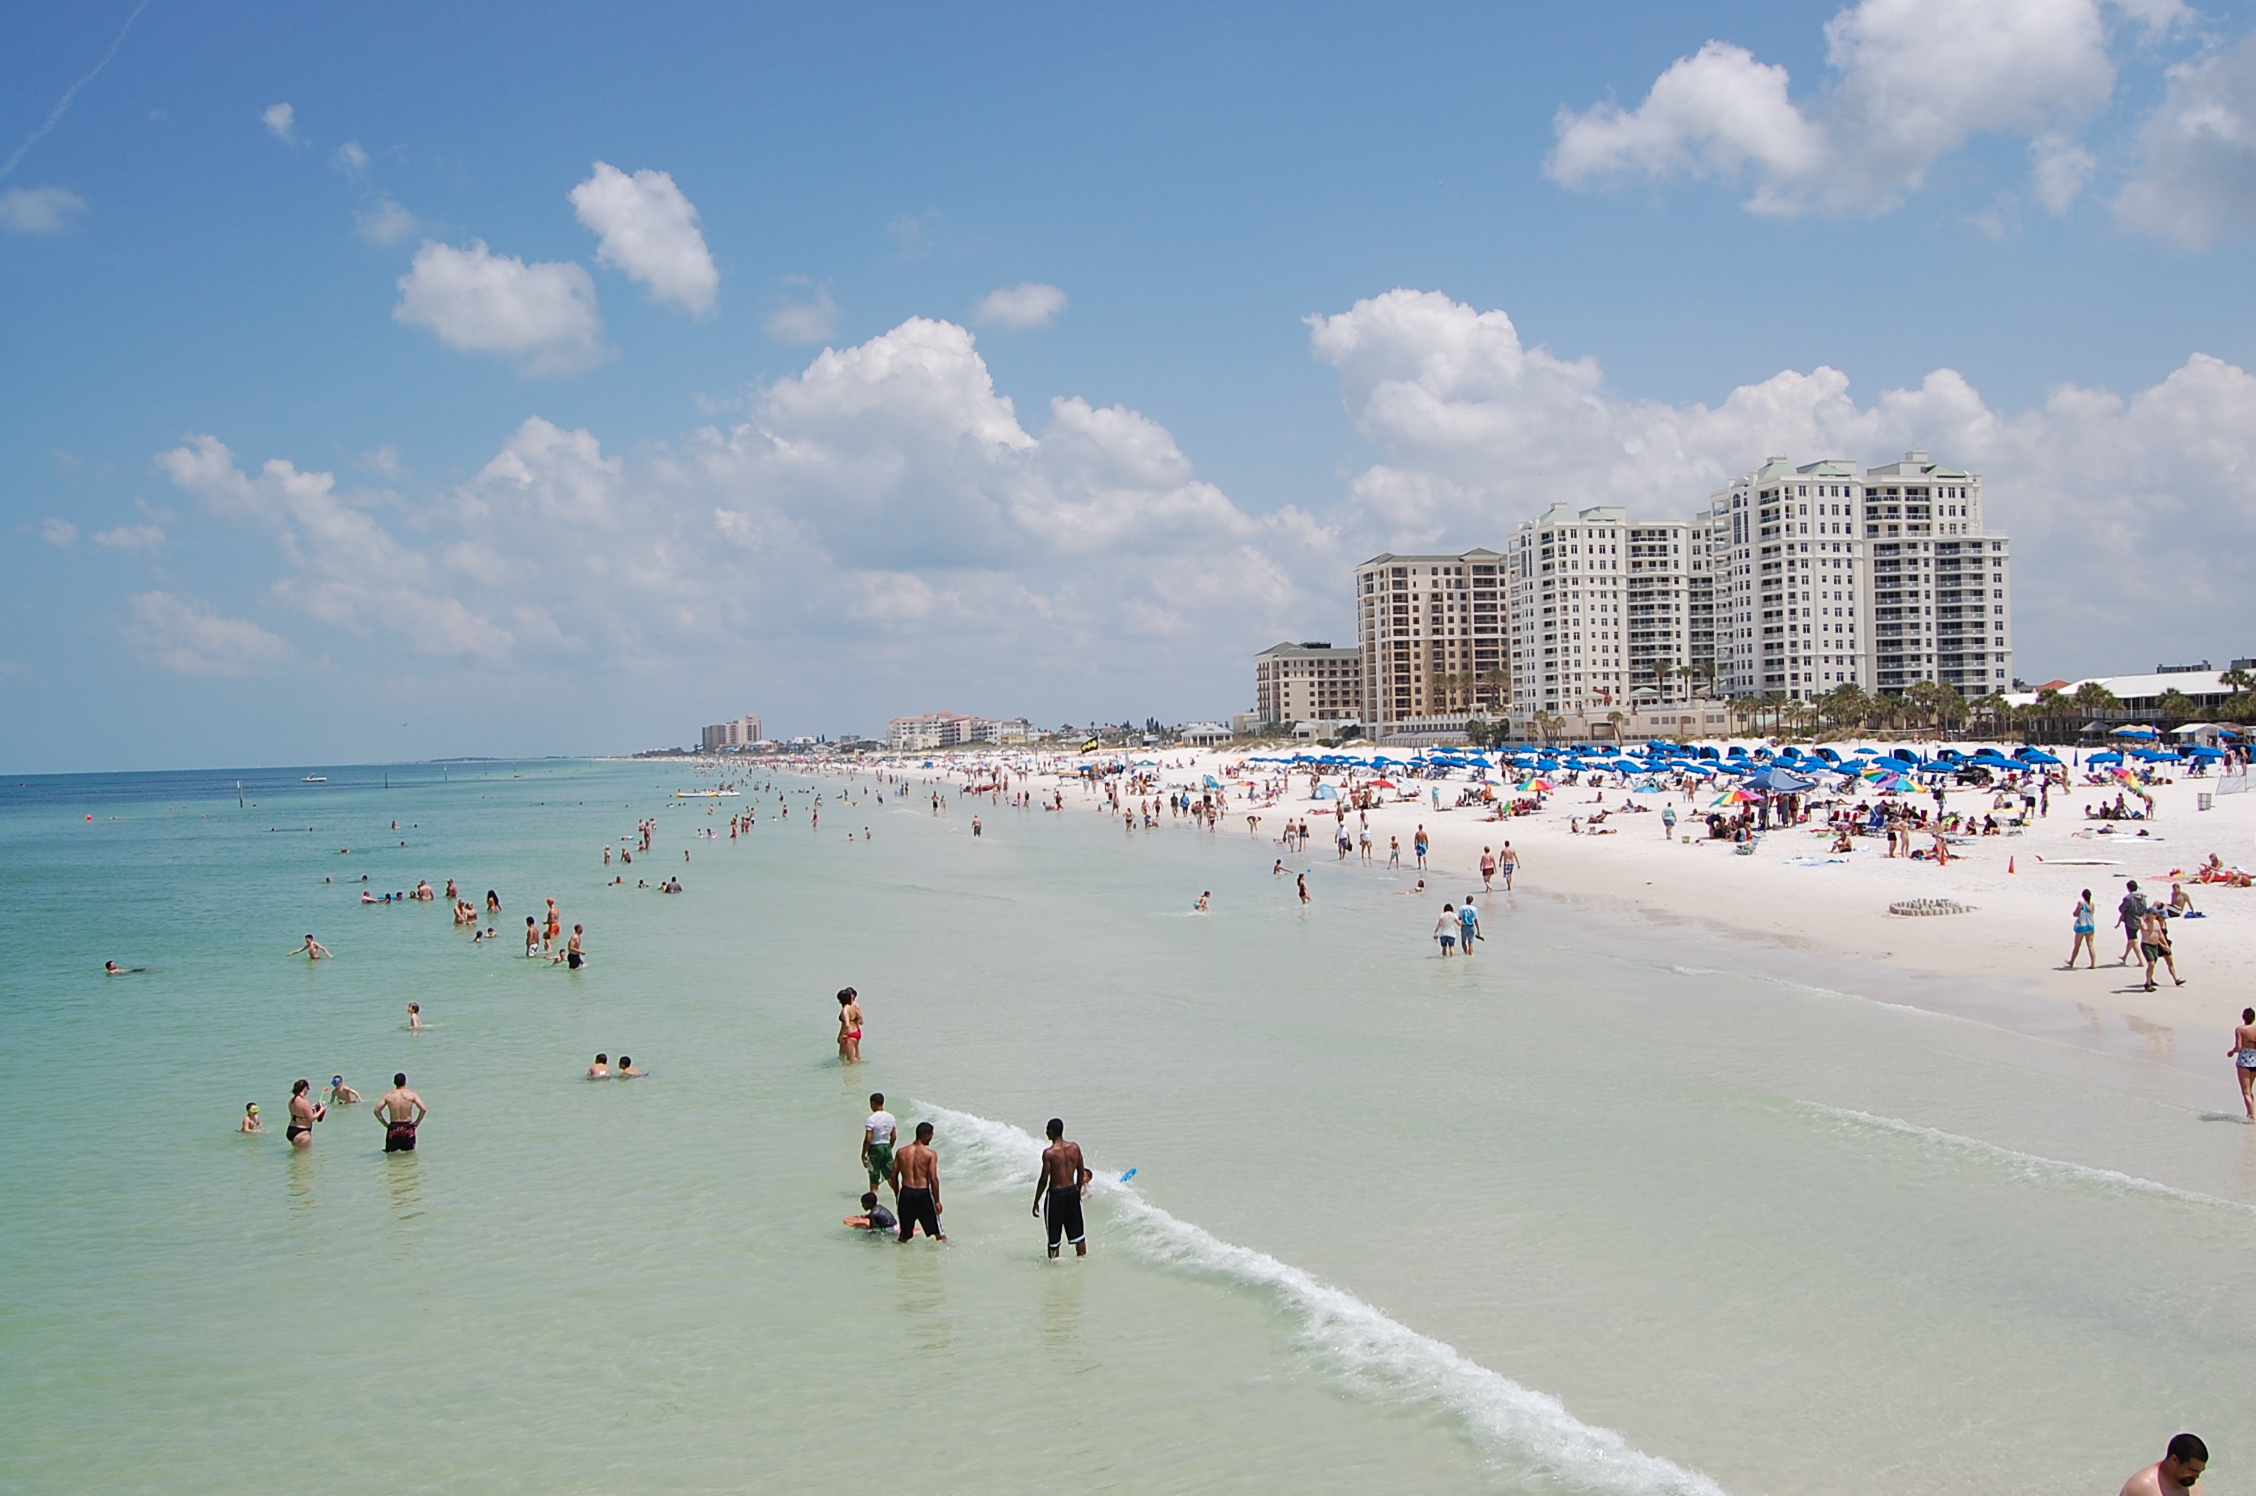  Tampa  Bay  Beaches  offers additional activities for the 